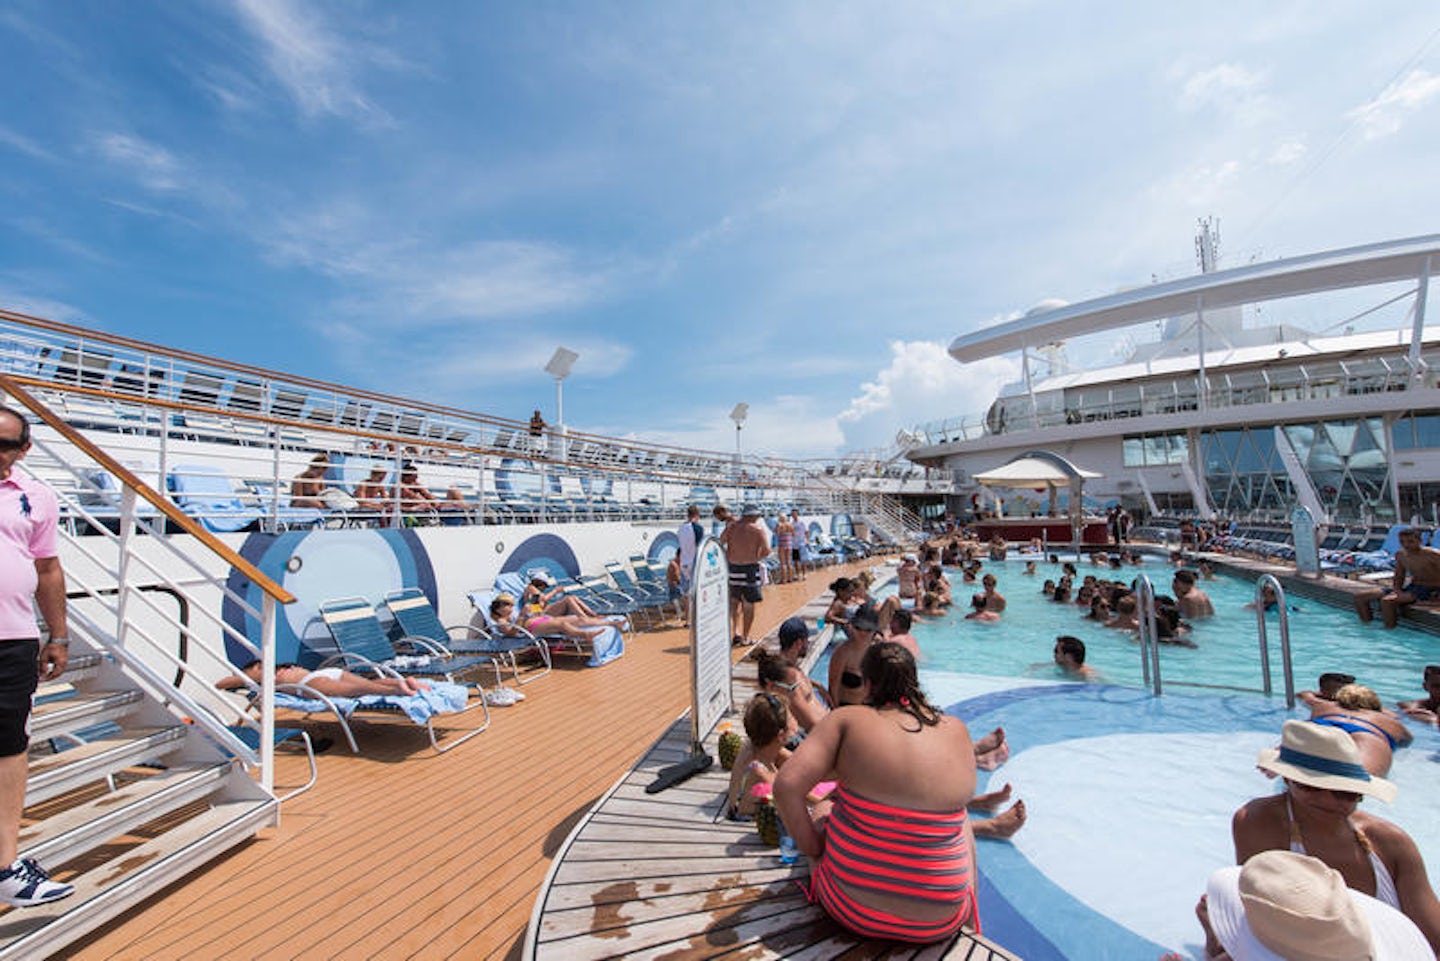 The Main Pool on Oasis of the Seas